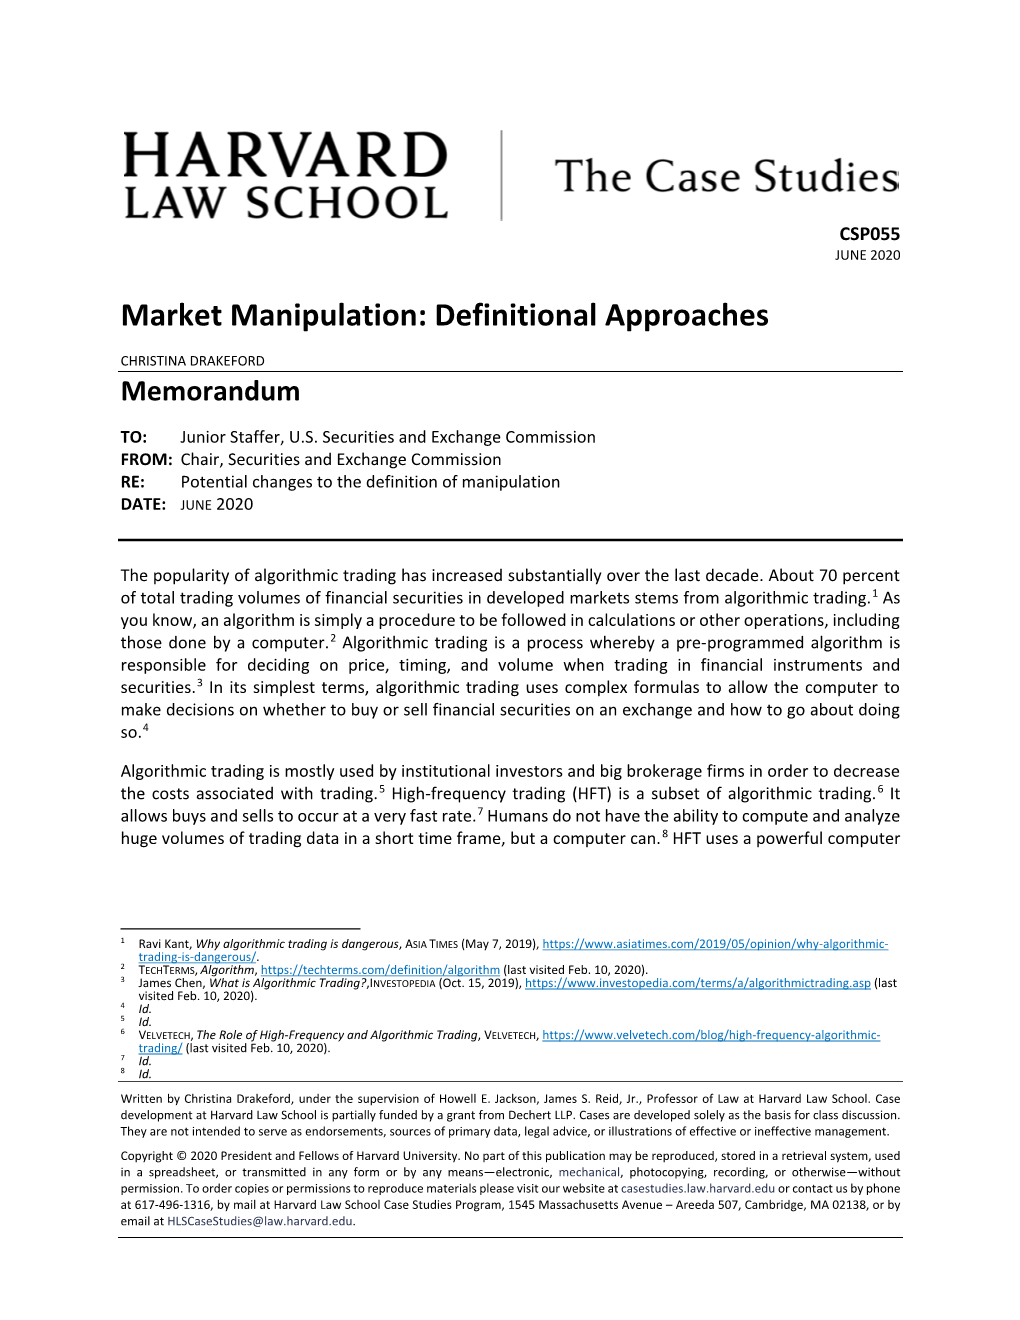 Market Manipulation: Definitional Approaches